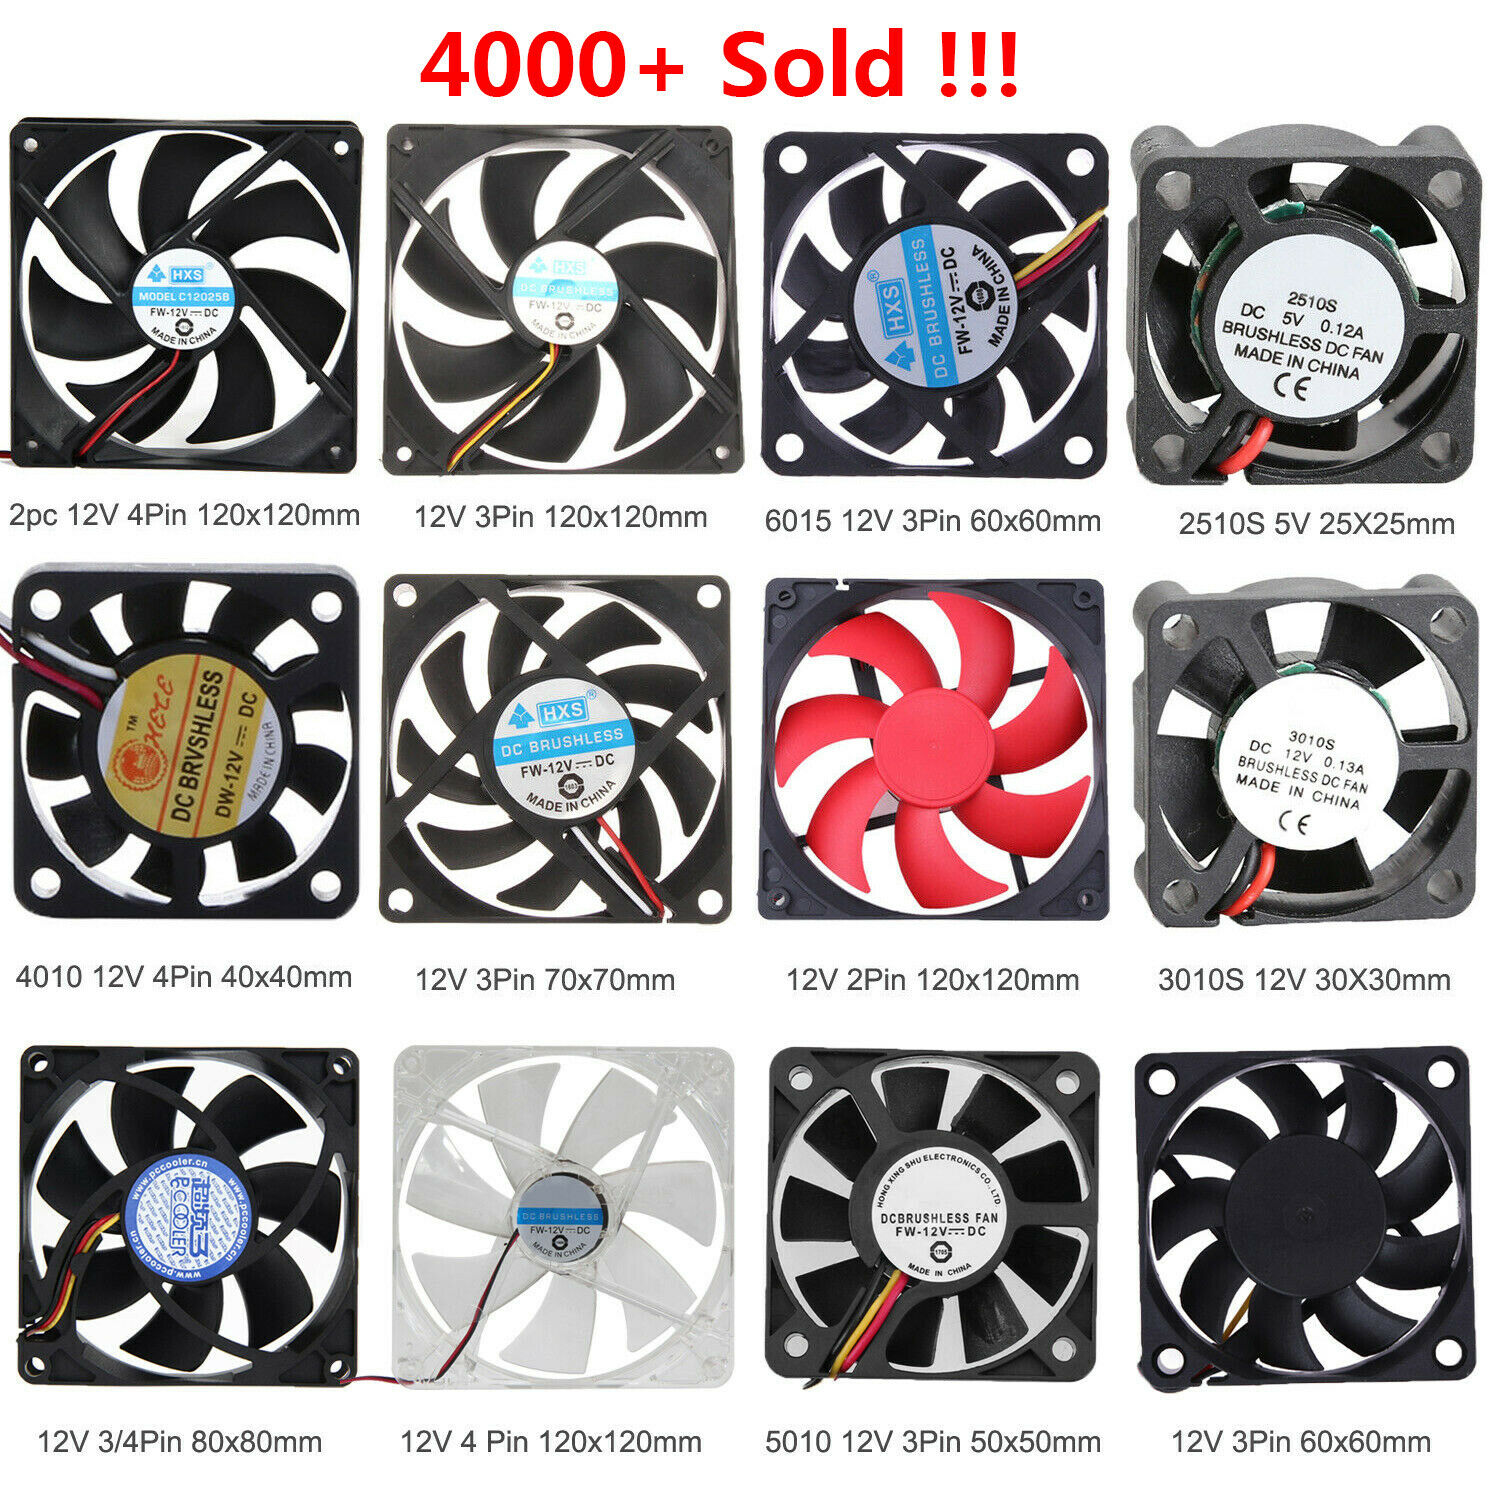 30/40/50/60/70/80/120mm Dc 12v 2/3/4pin Mini Cooler Cooling Fan For Pc Computer